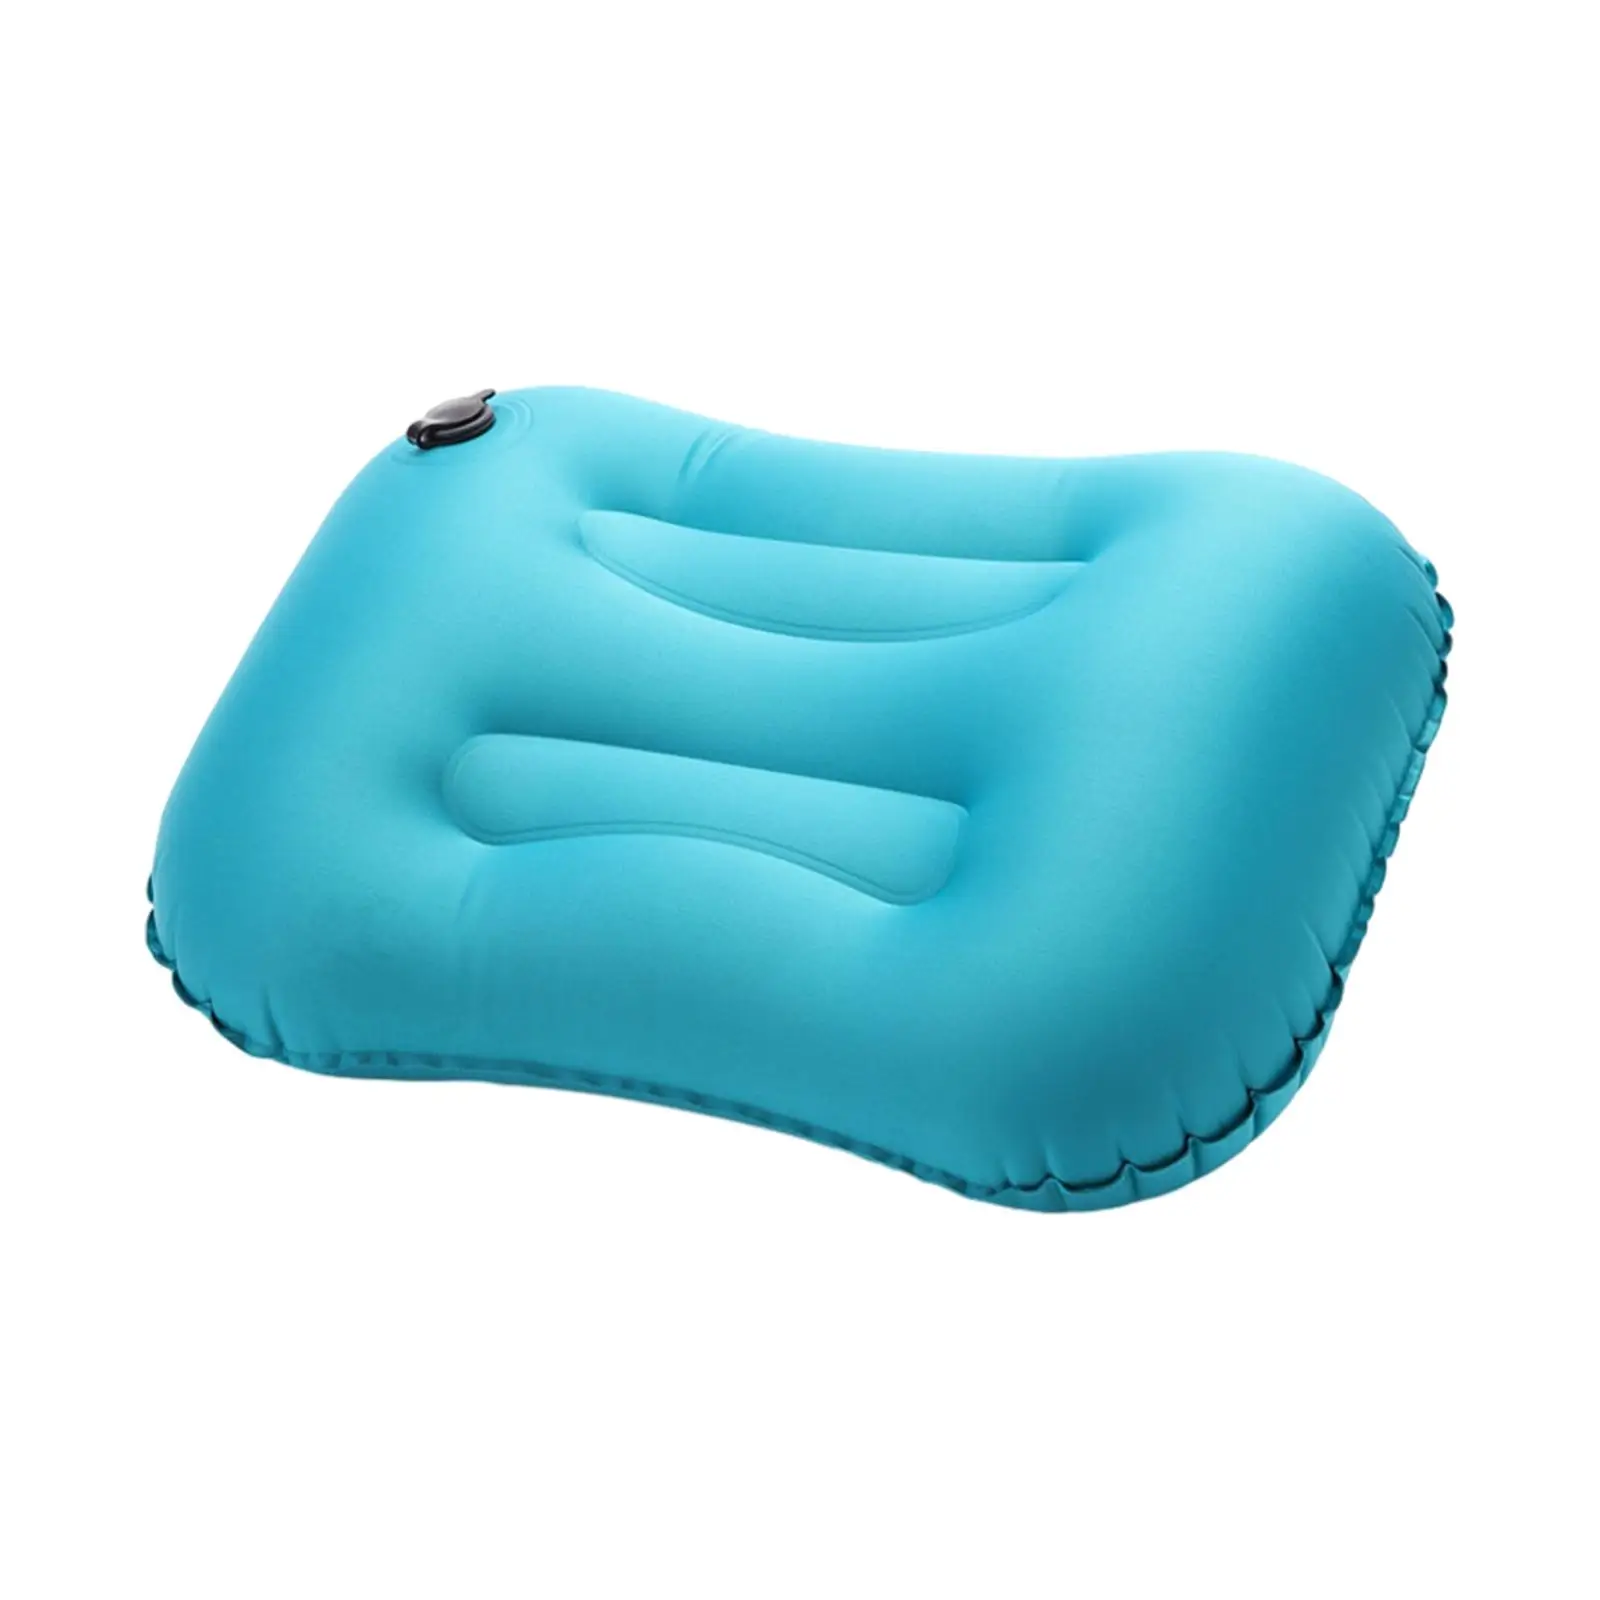 Inflatable Camping Pillow Portable Travel Pillow for Traveling Beach Hiking